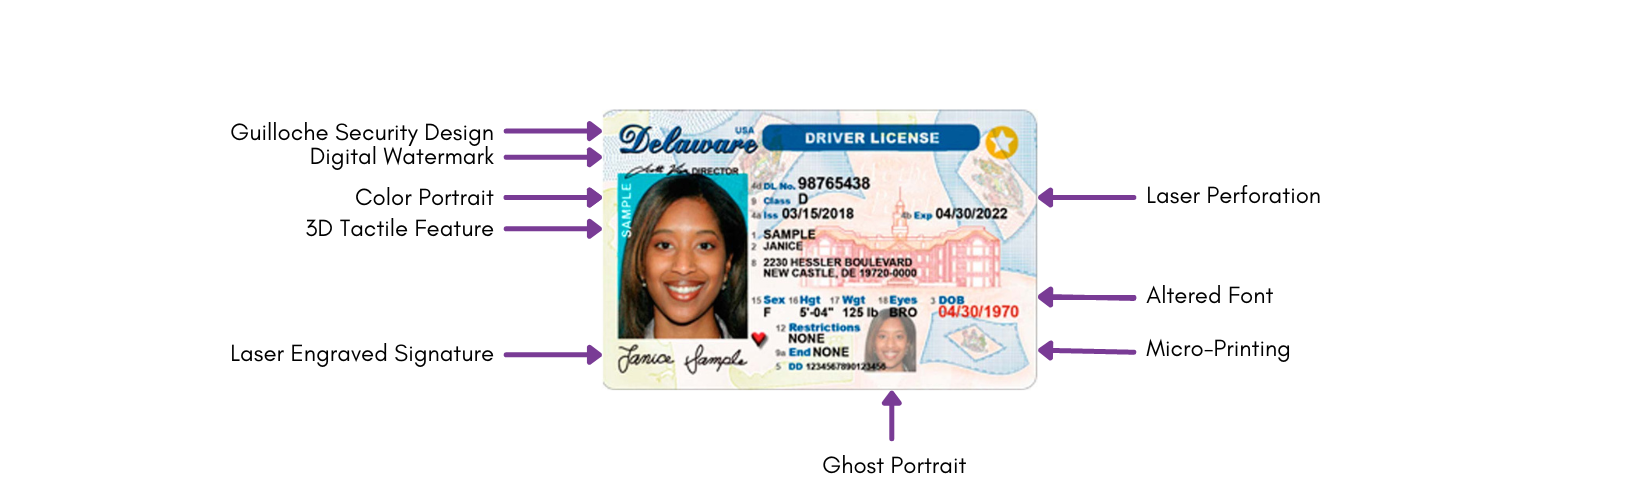 License Security Features Graphic